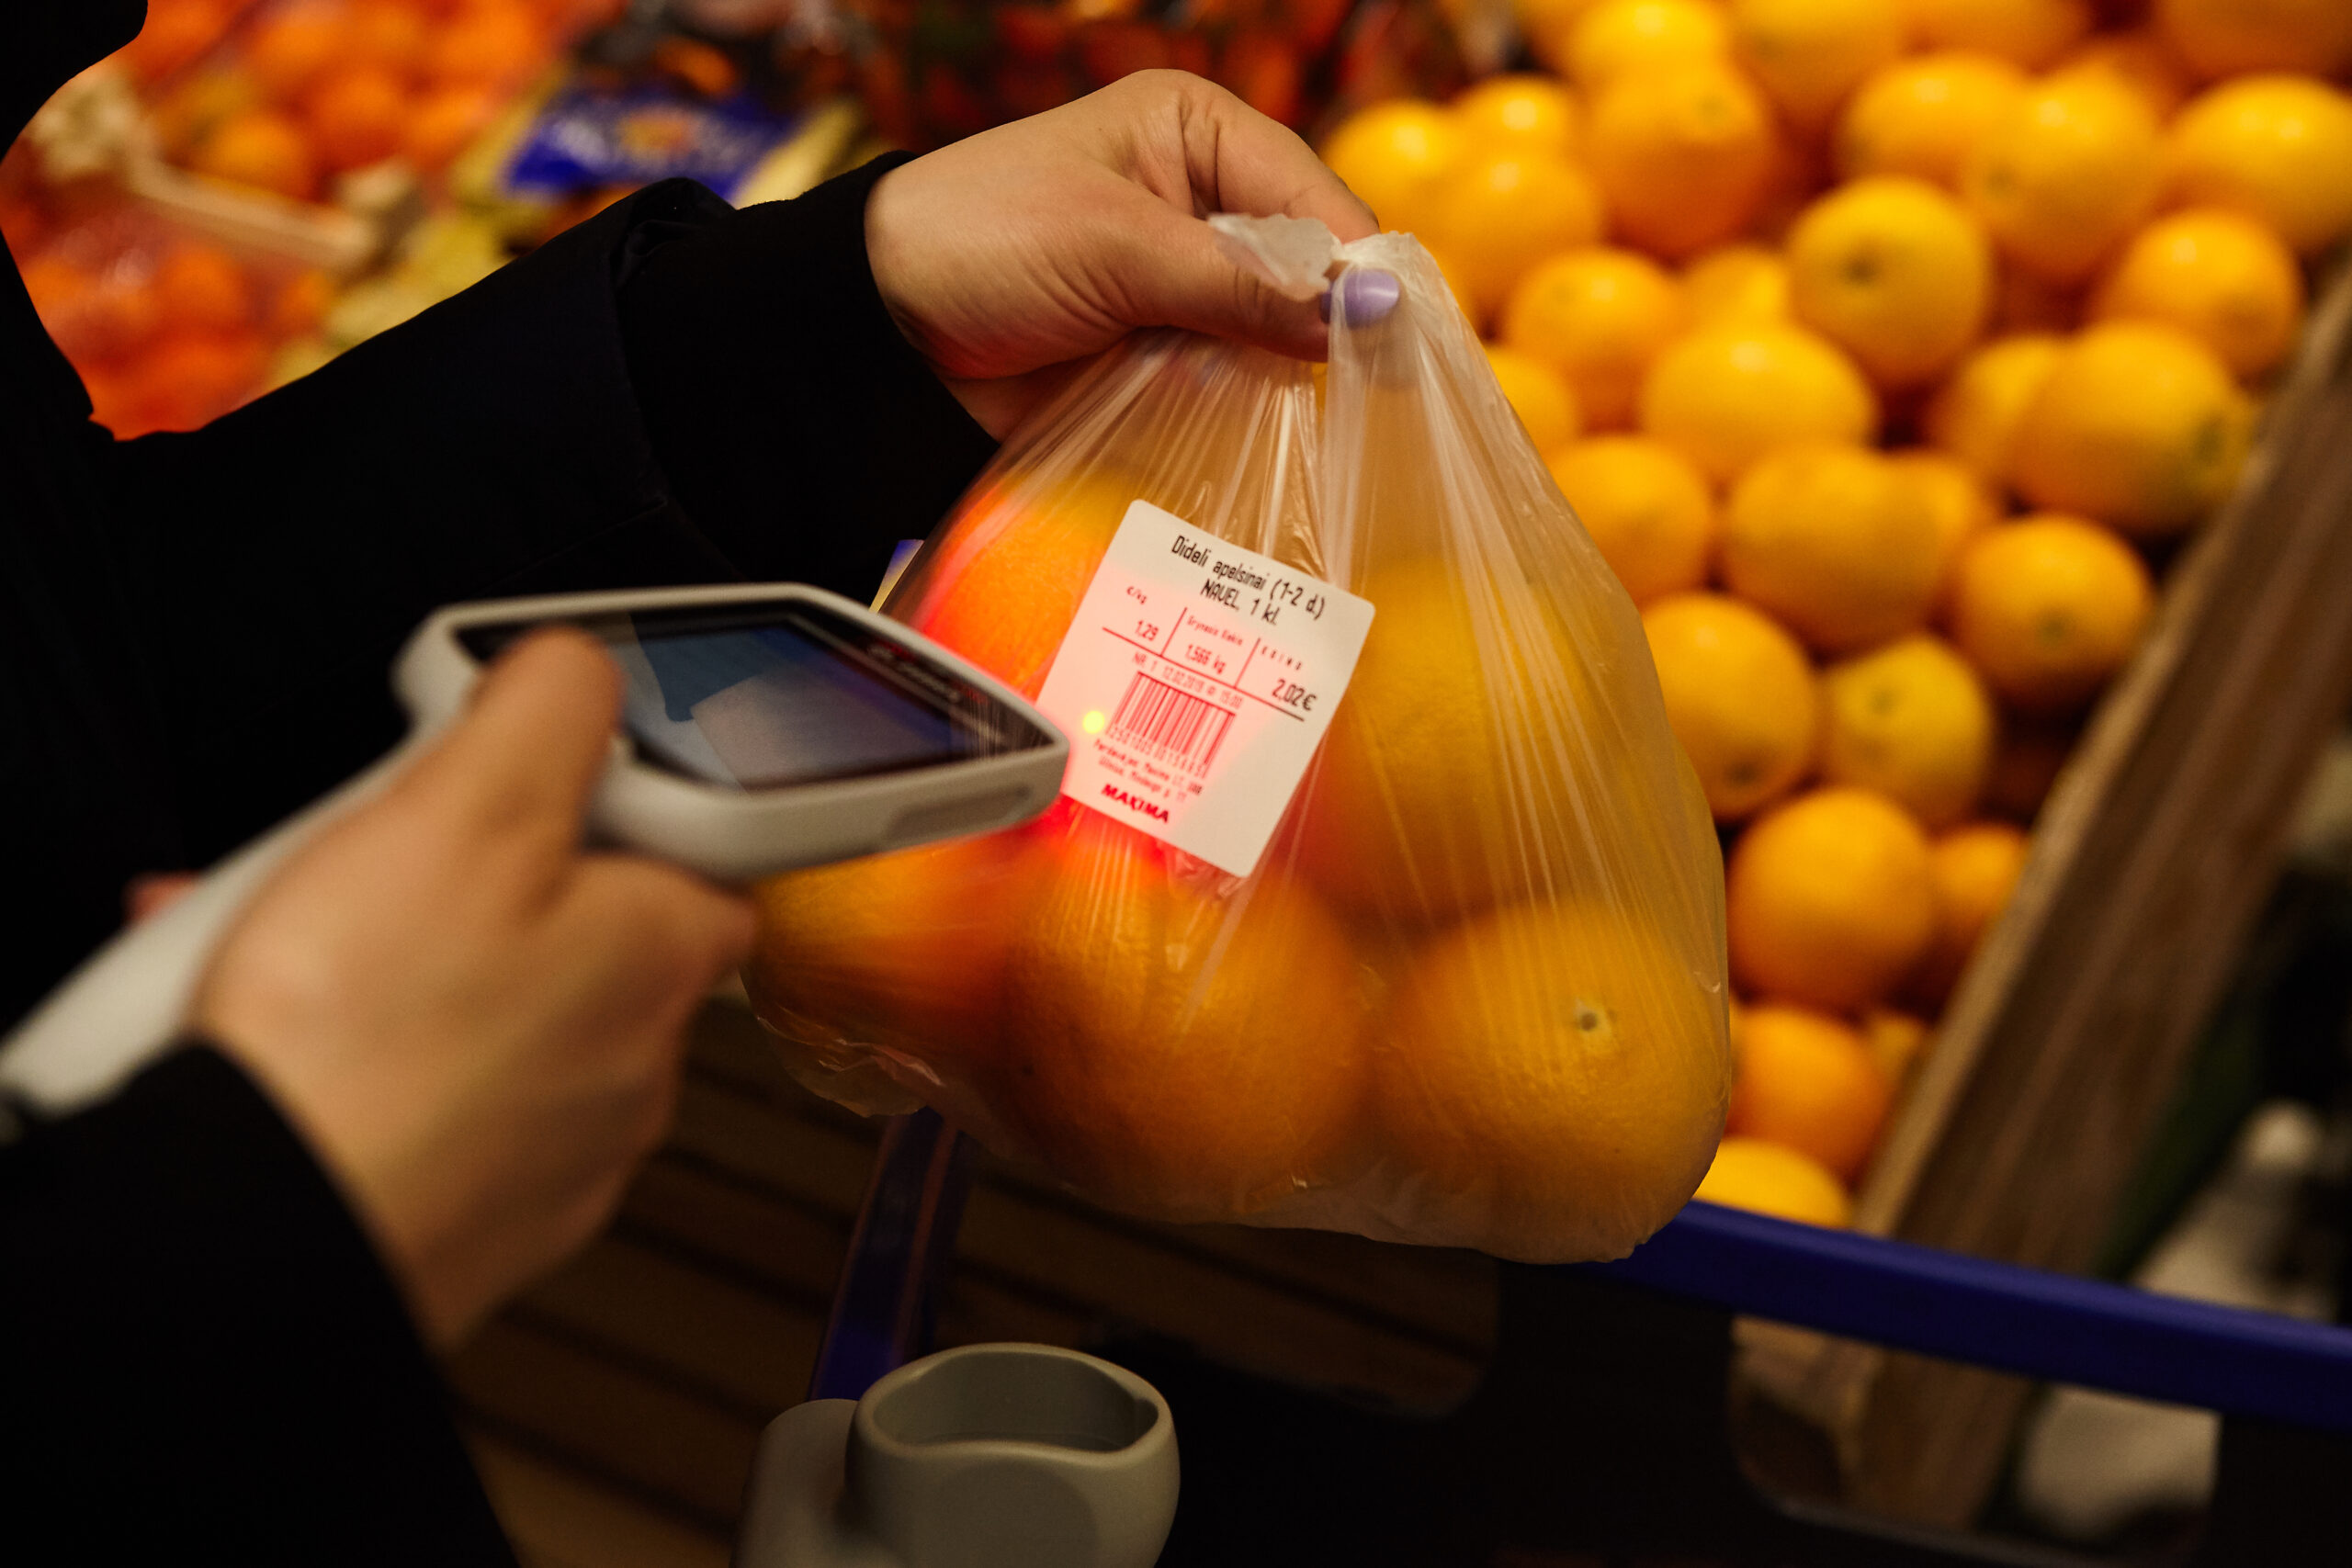 Shopper using personal scanning device to scan and pay for goods in a store